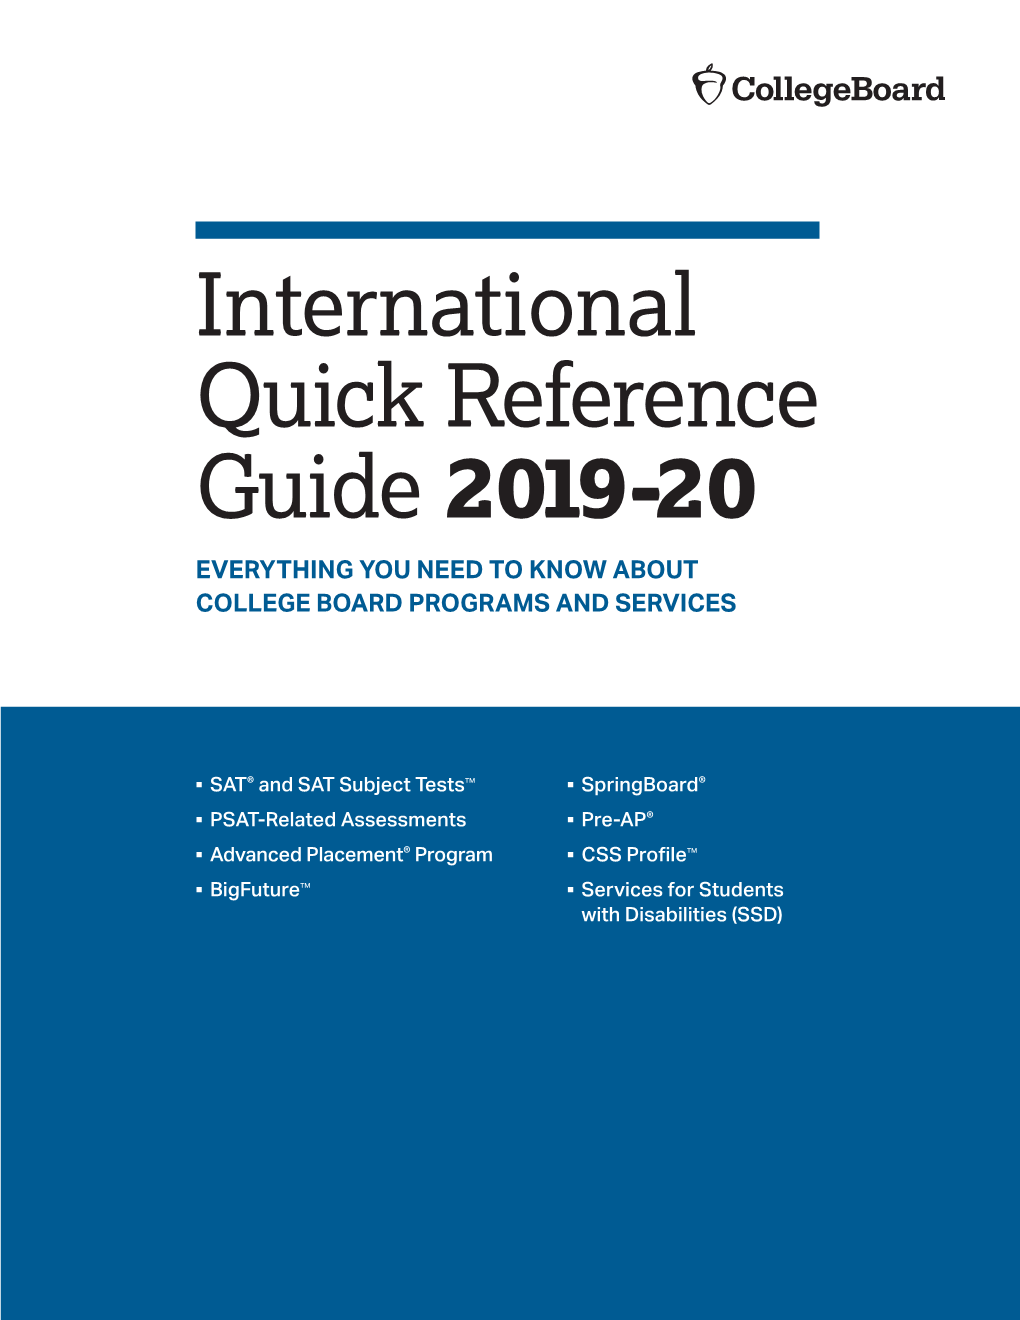 International Quick Reference Guide 2019-20